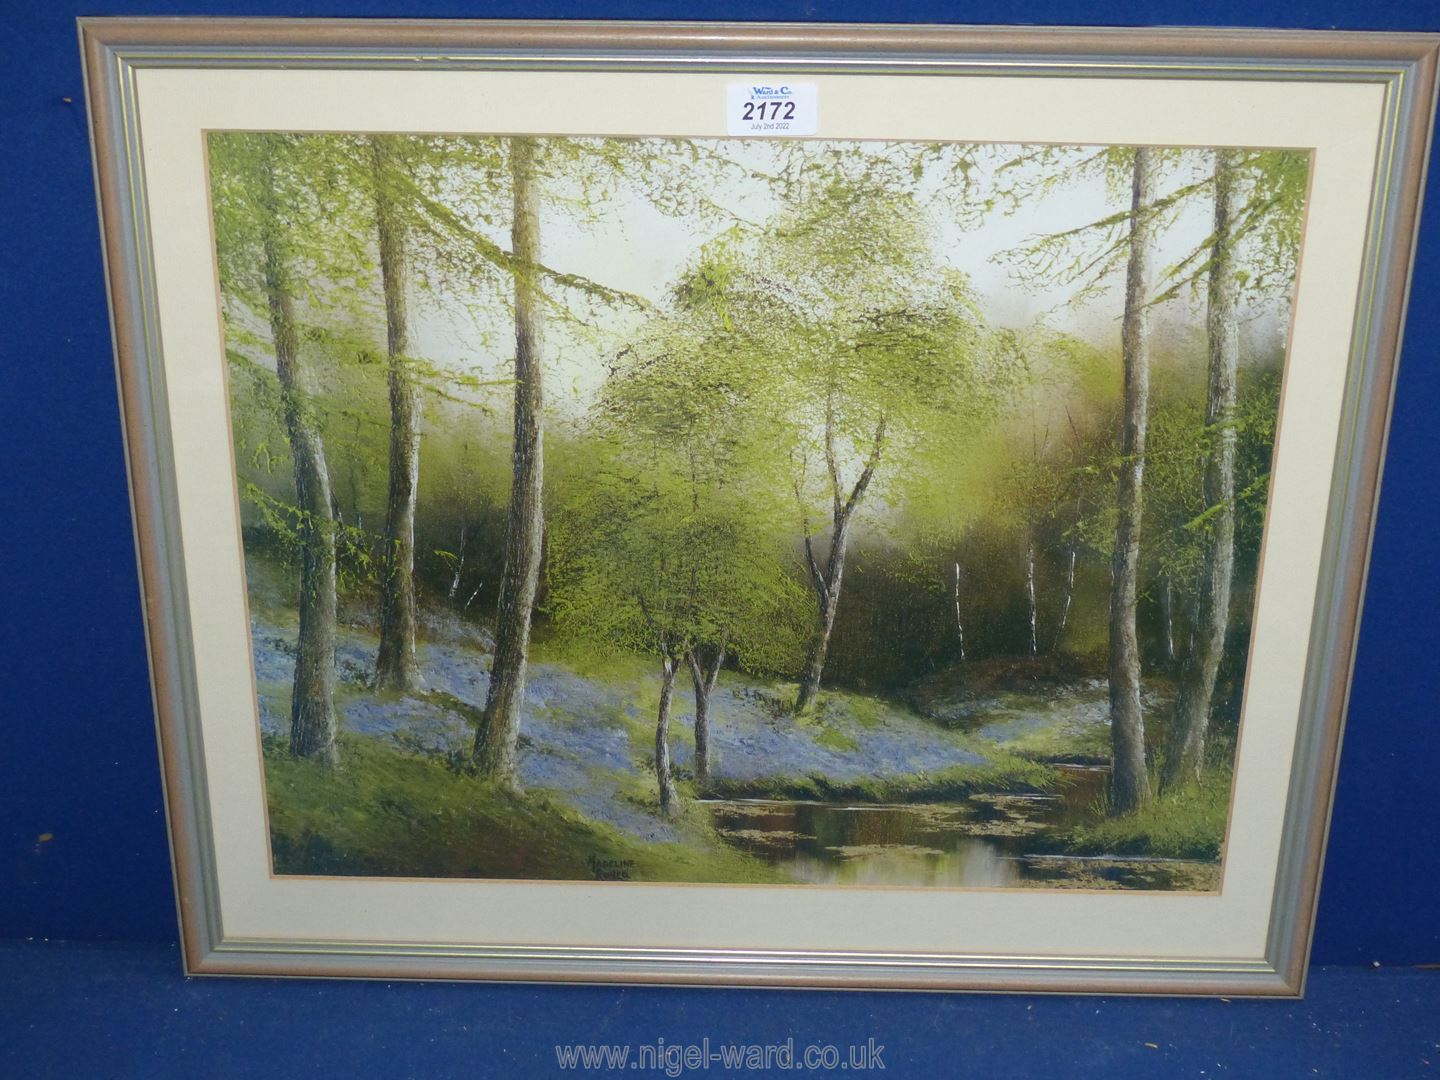 A framed and mounted Print depicting a woodland with stream and bluebells, signed Madeline Ronco.